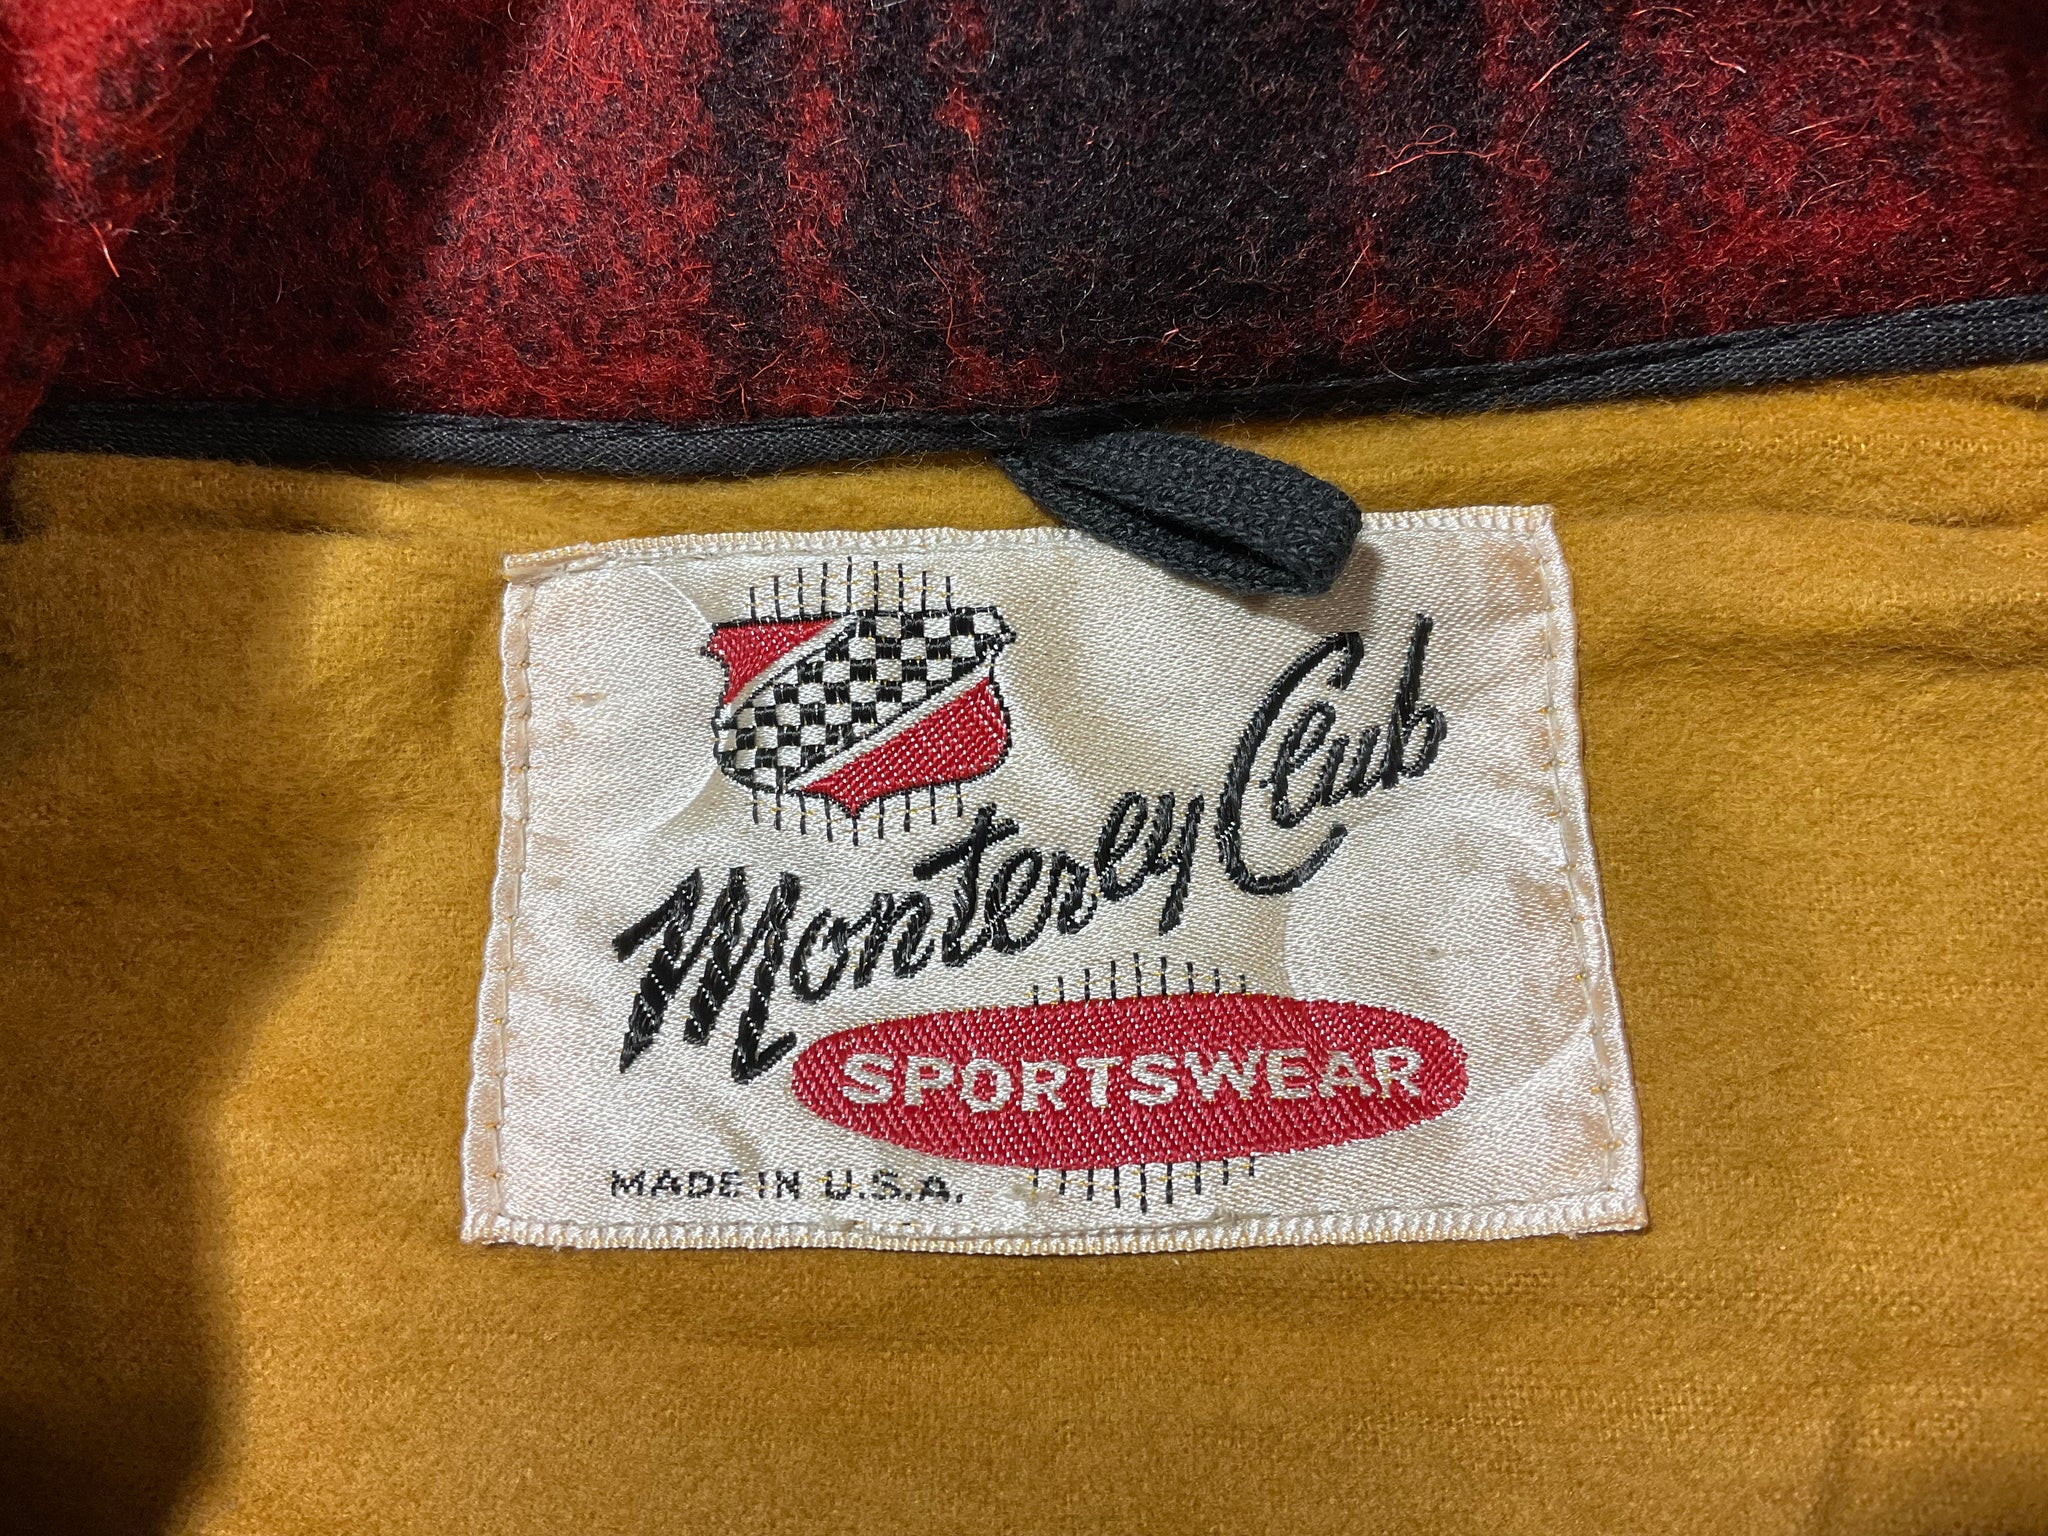 Monterey Club Sportswear Vintage 1970’s Wool CPO - Hunting Jacket Made in USA